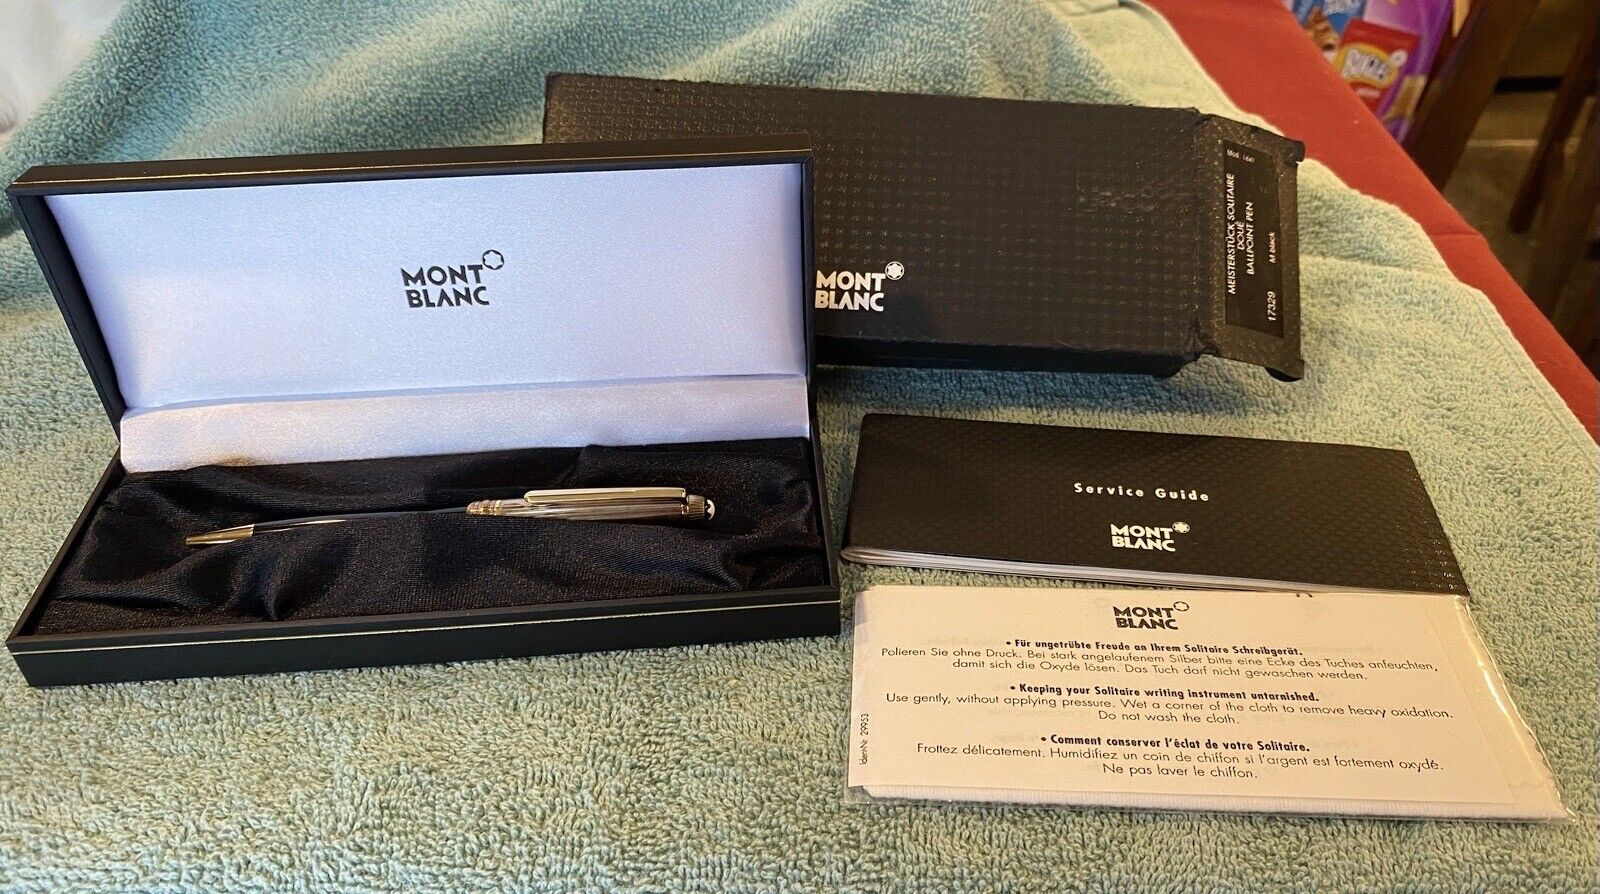 MONTBLANC MEISTERSTRUCK STERLING BALLPOINT PEN WITH BOX, BOOK, CLOTH, REFILLS